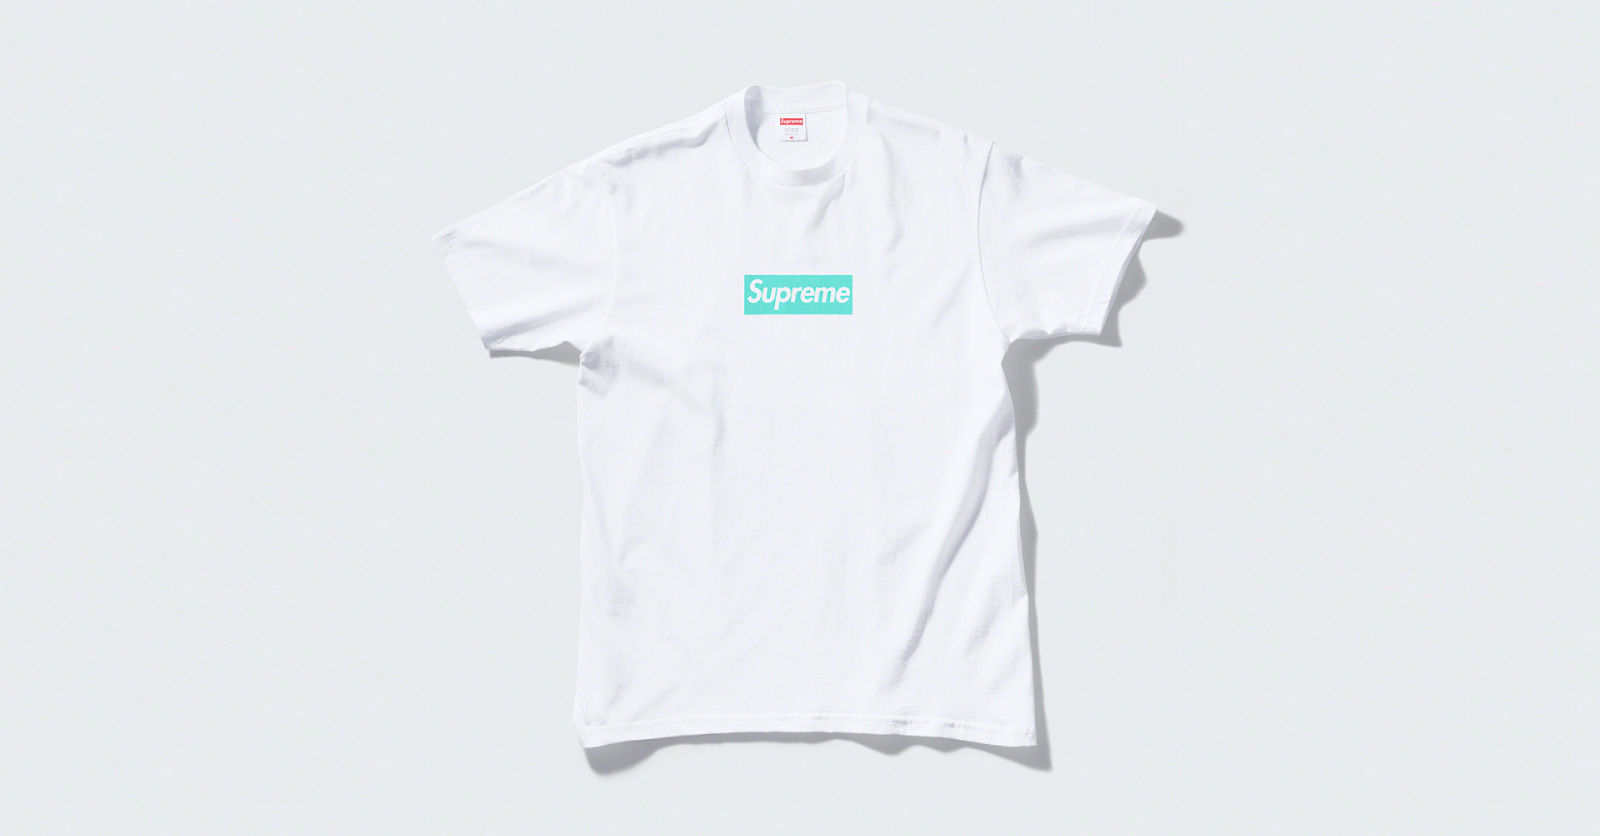 Supreme x Tiffany  Co: what to know about the Singapore release